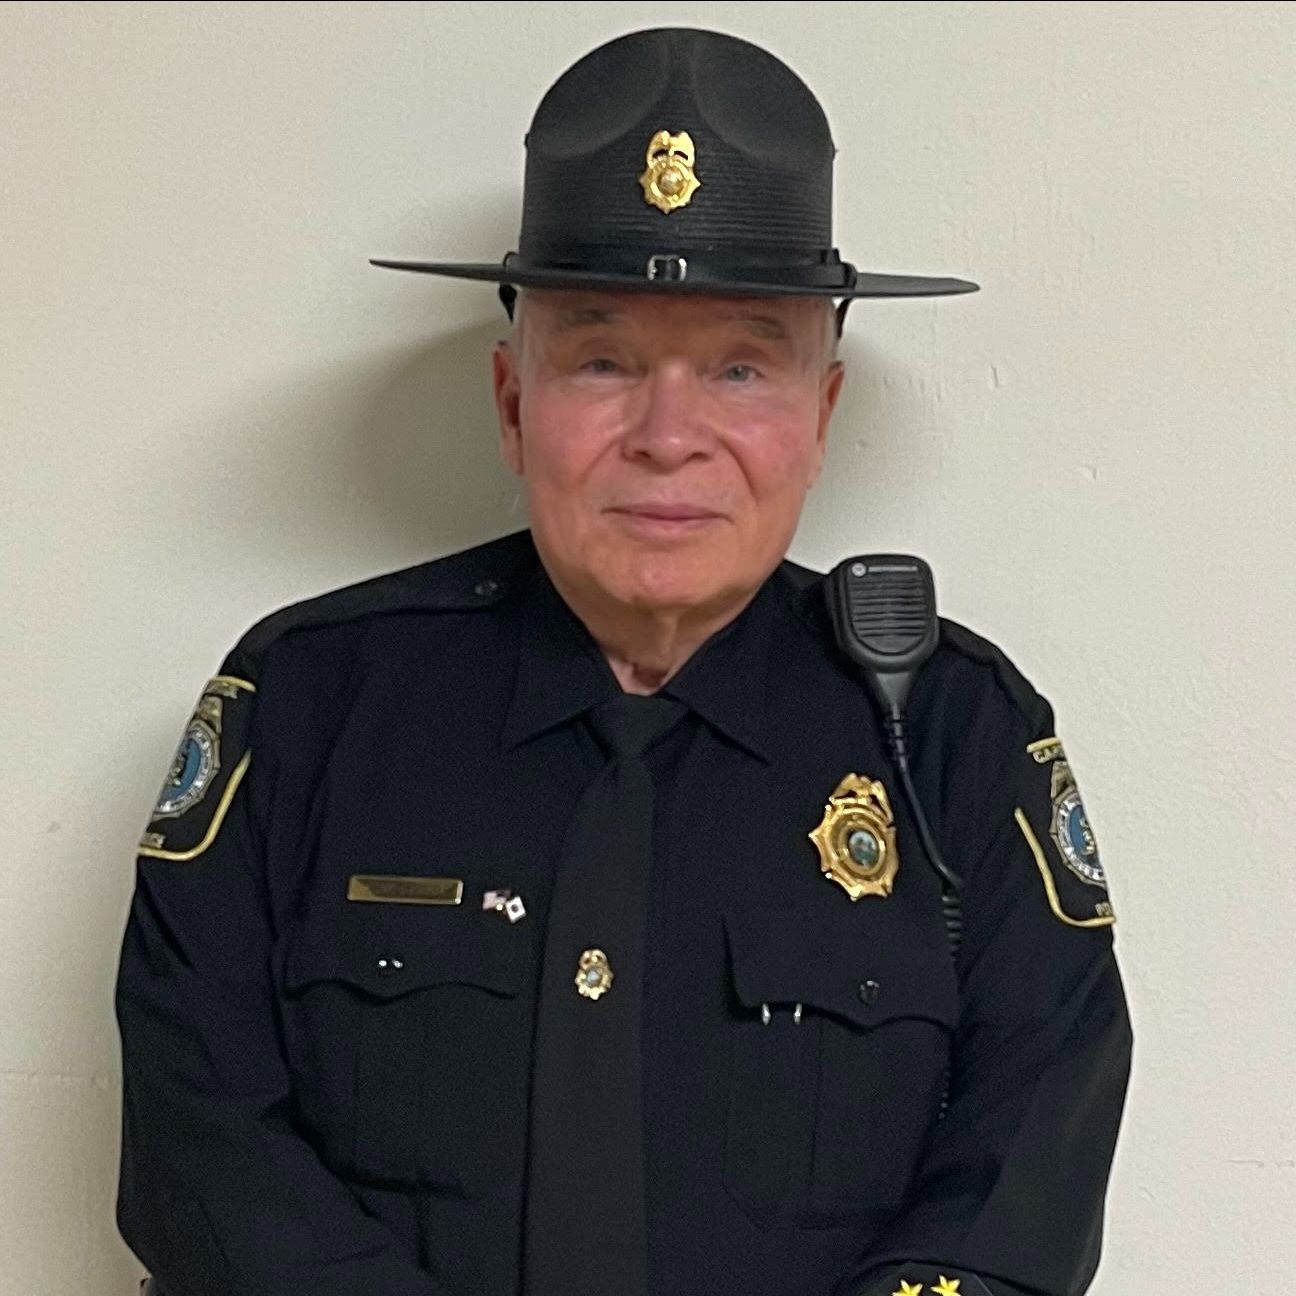 West Virginia Division of Protective Services honors retiring officer after 51-year law enforcement career  